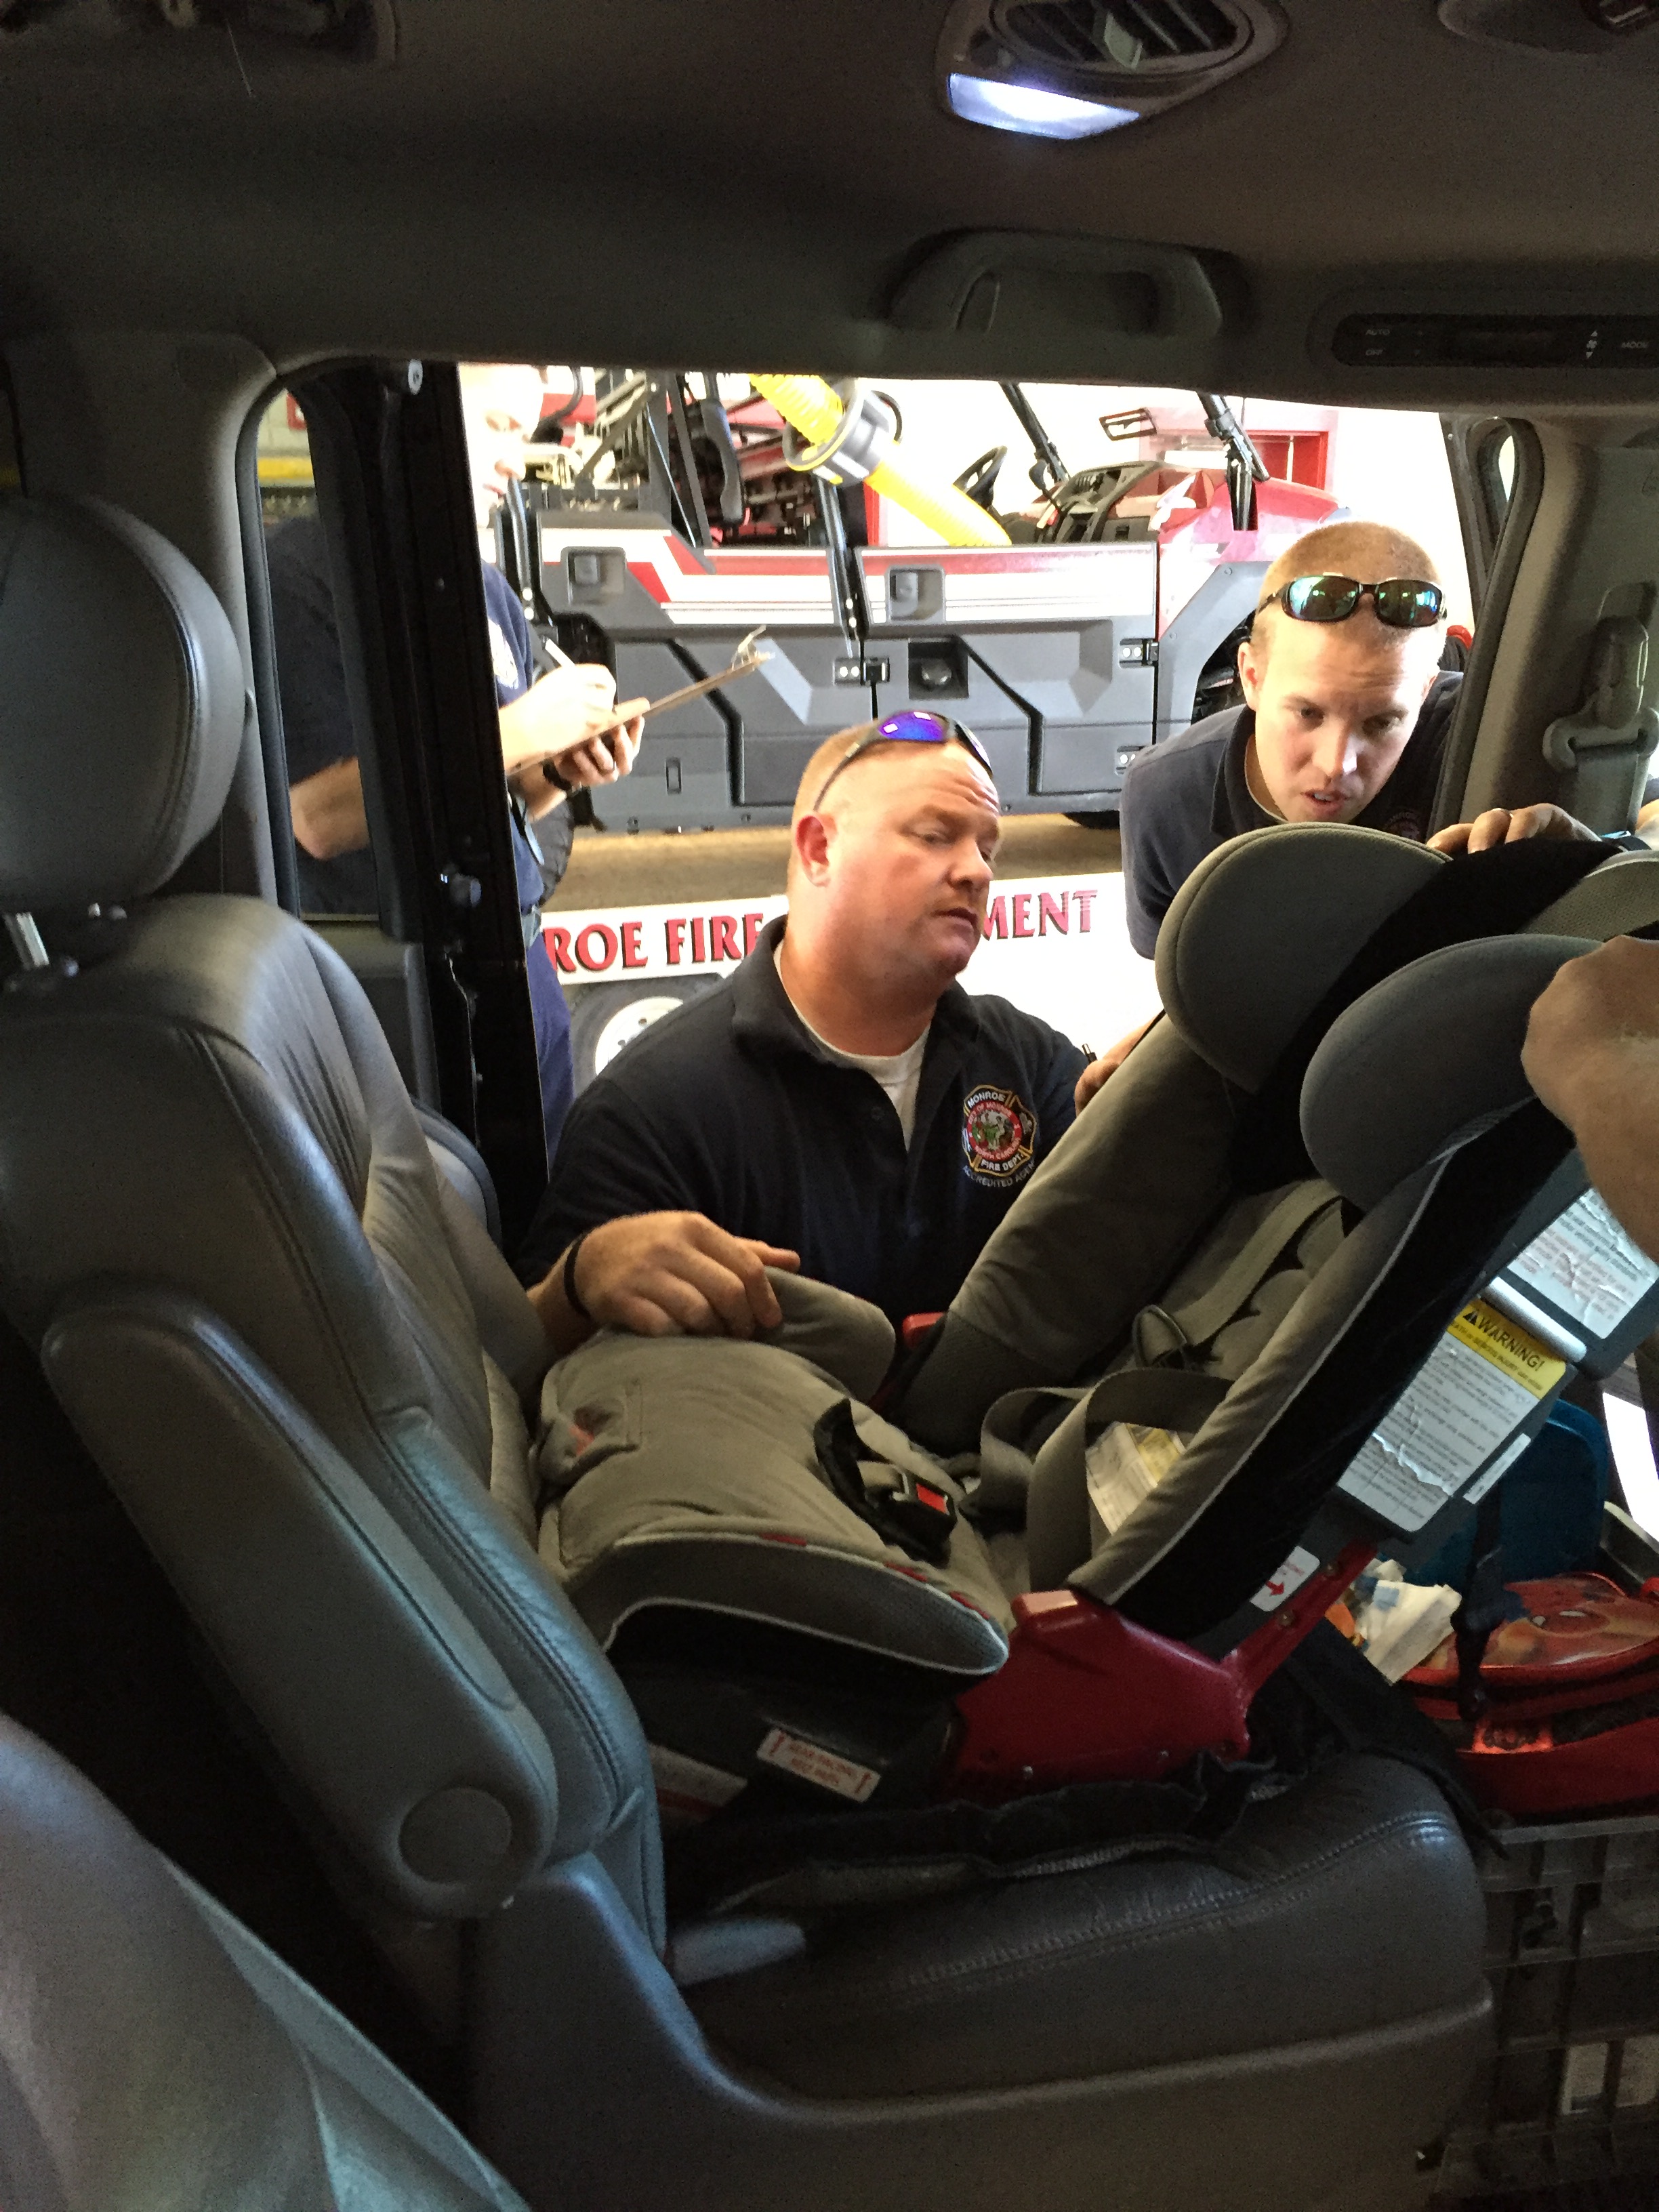 Firefighters installing a child car seat